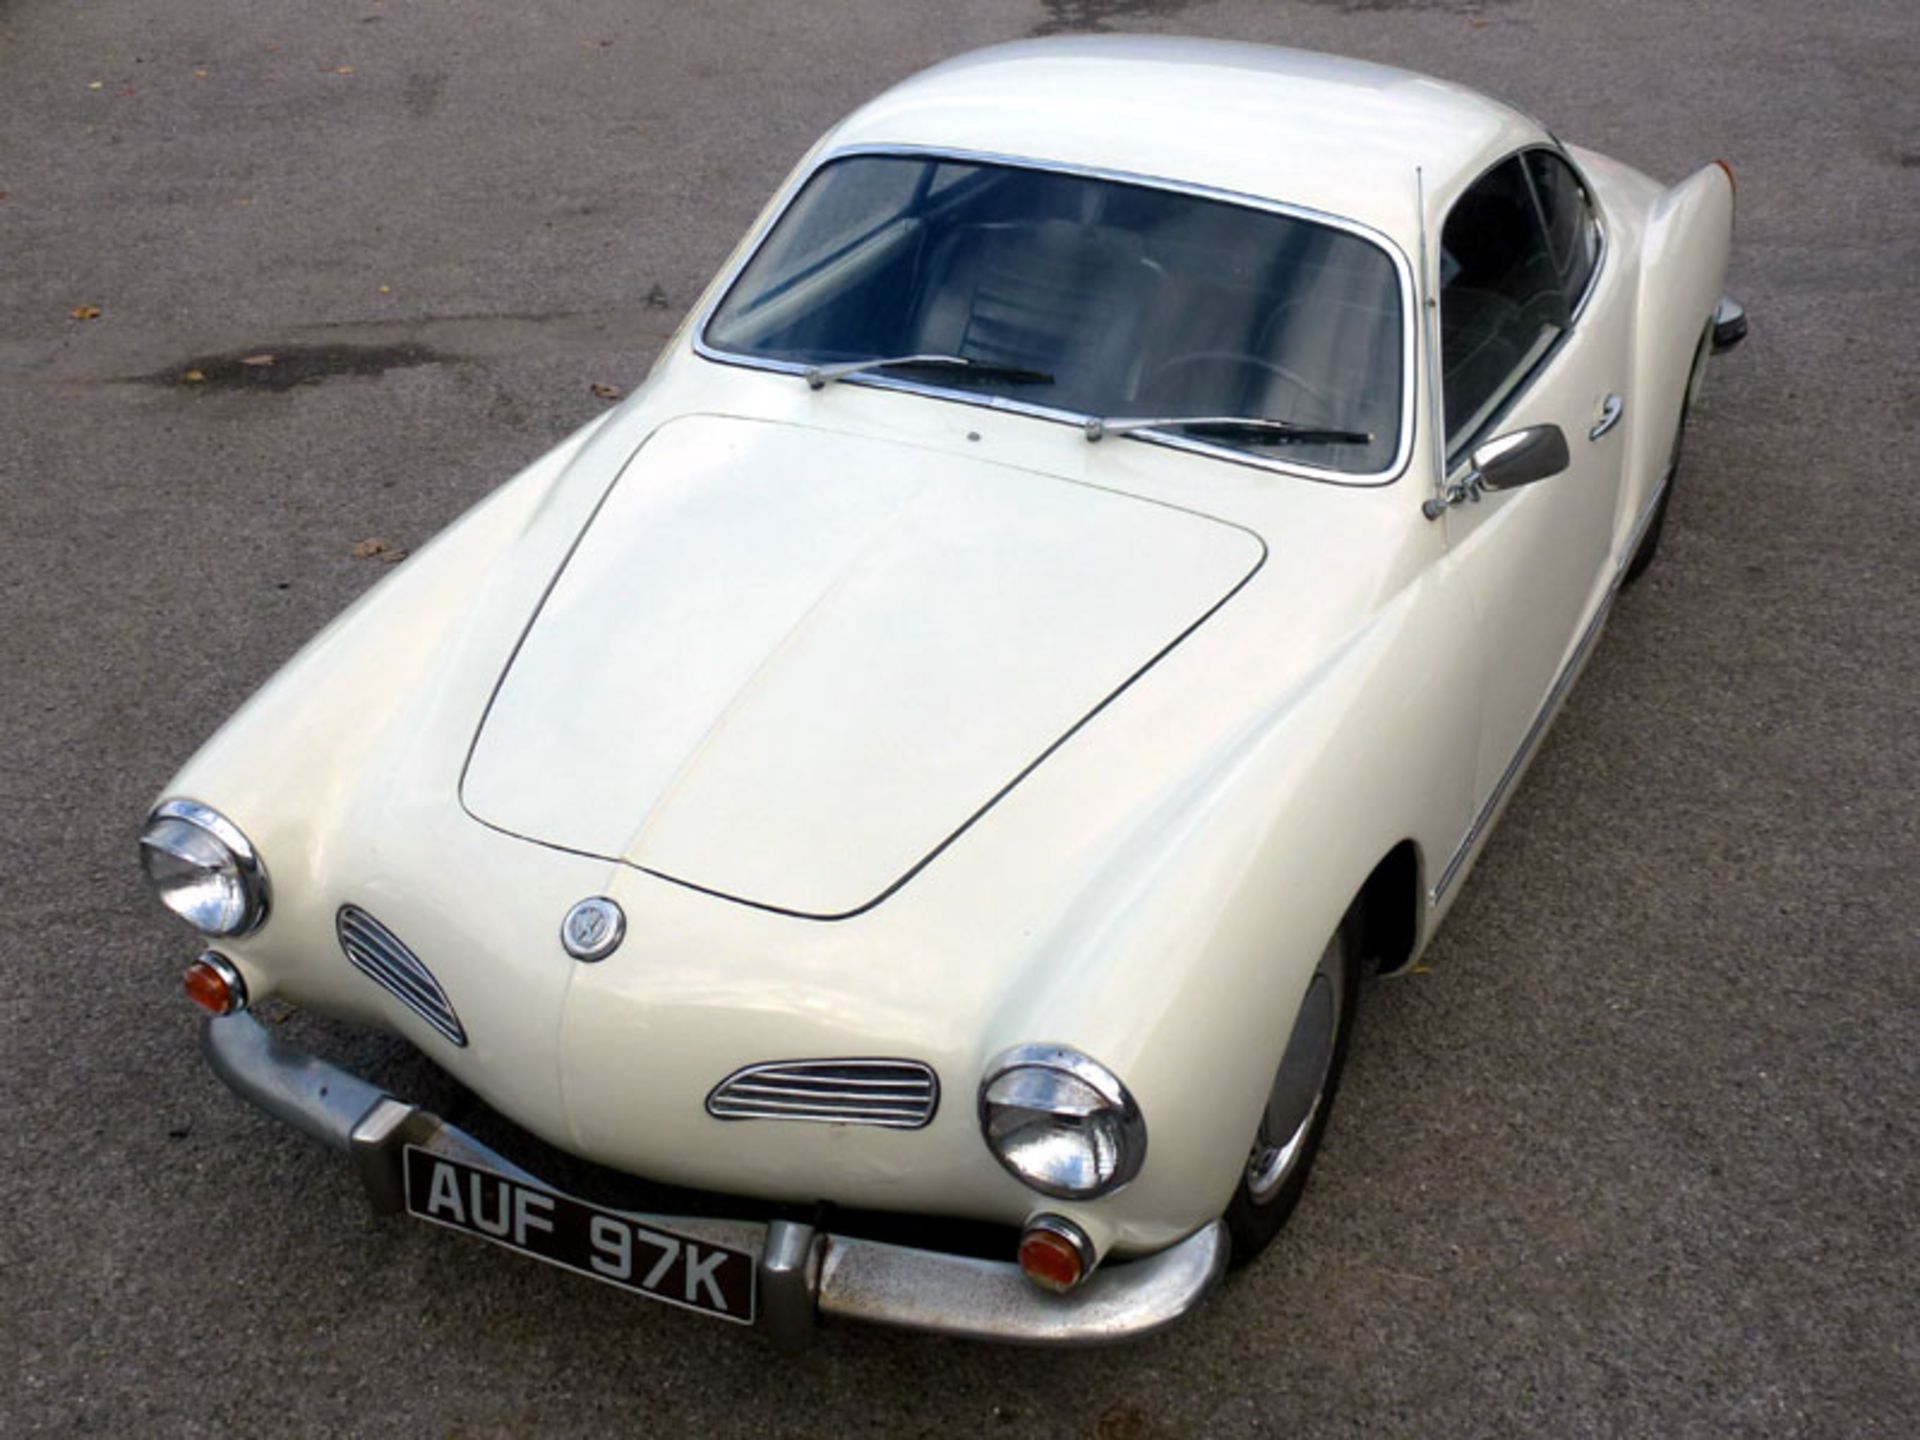 - First UK registered in 1997 and offered with current V5C

- Offered with a collection of